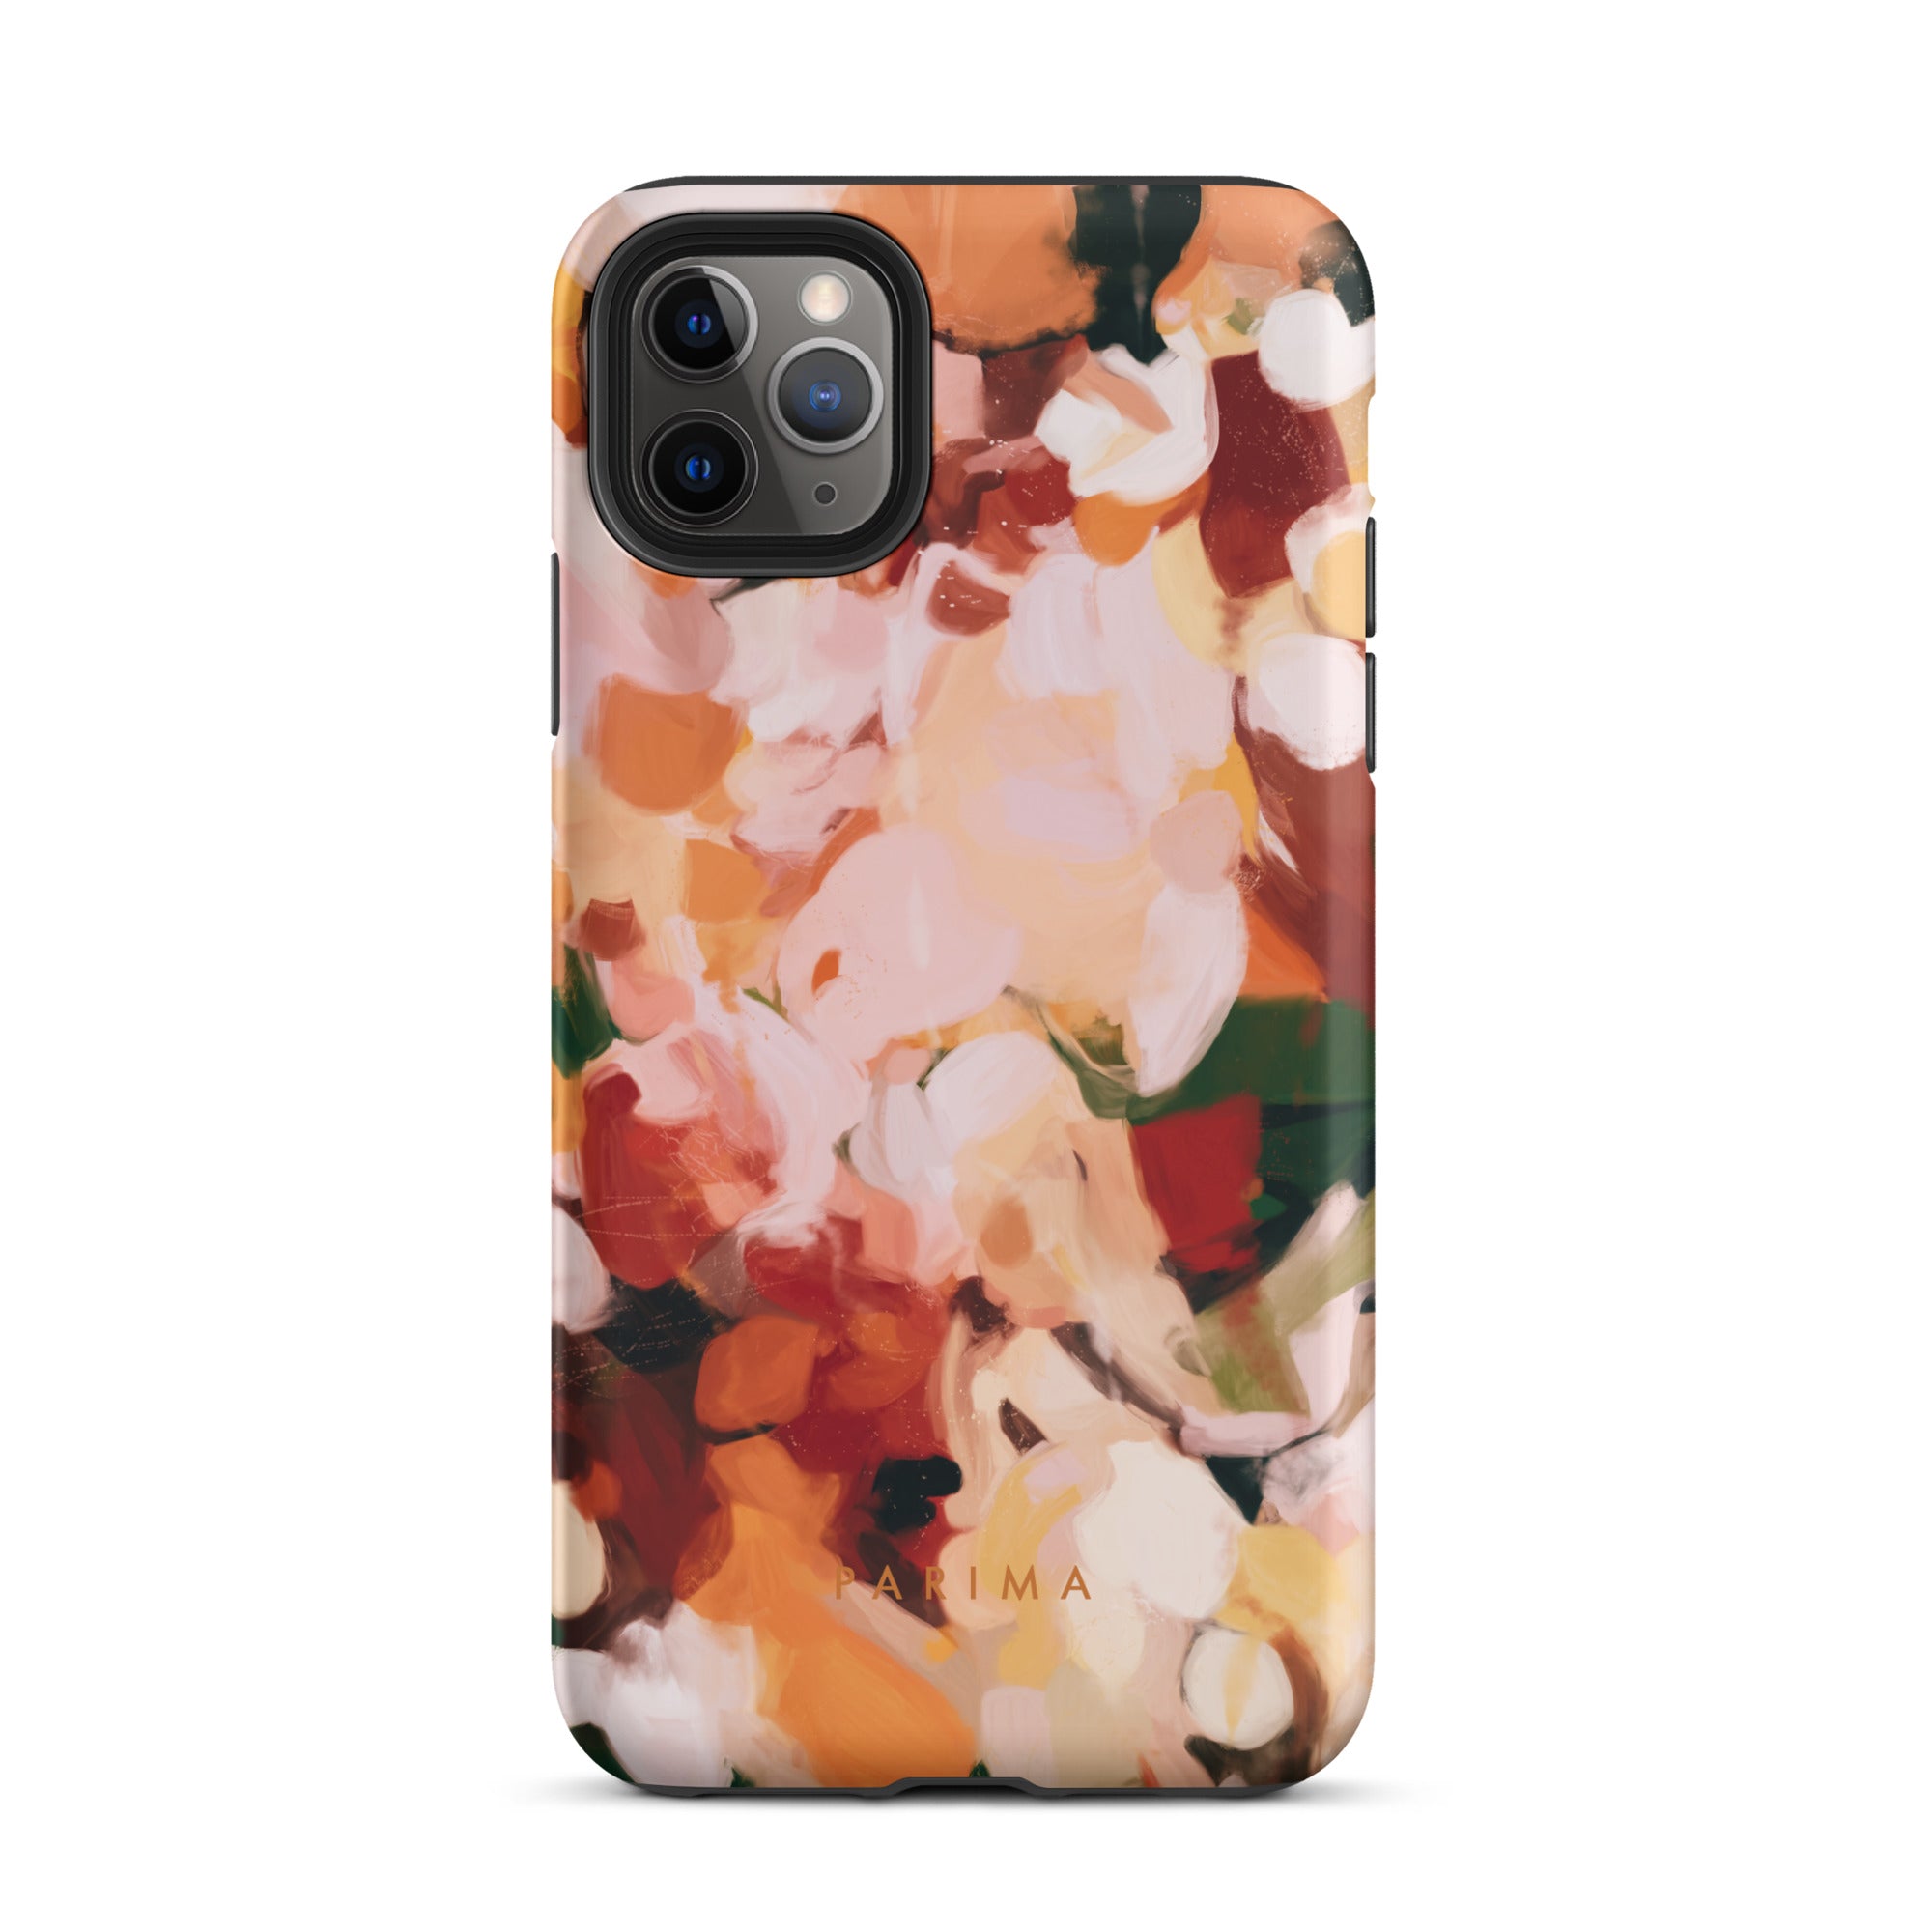 The Grove, pink and green abstract art on iPhone 11 Pro Max tough case by Parima Studio